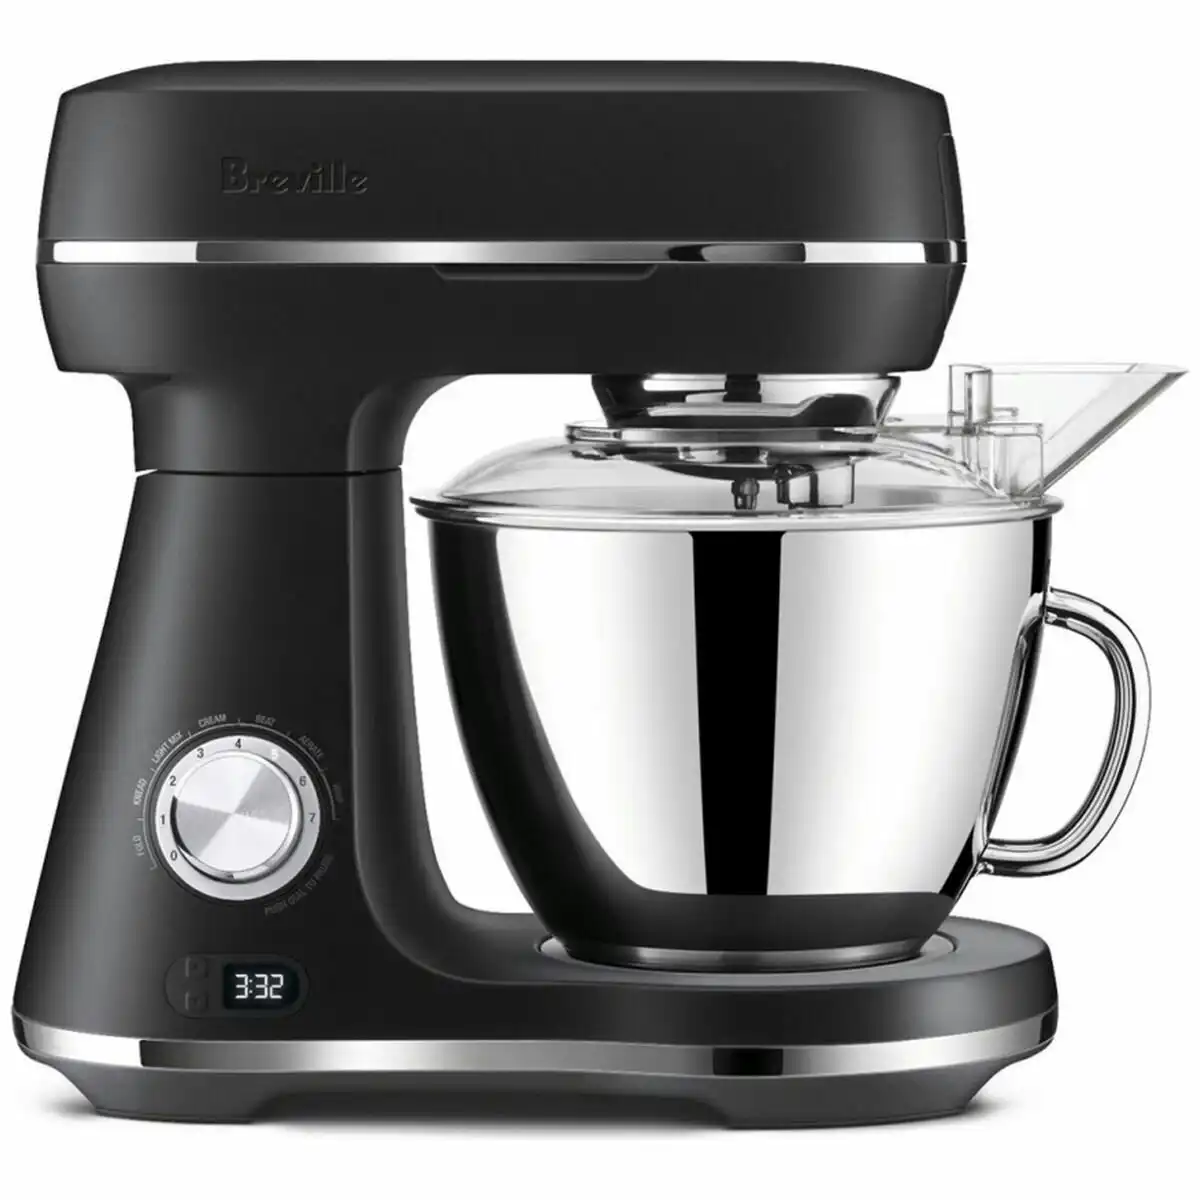 Breville The Bakery Chef Hub Food Mixer